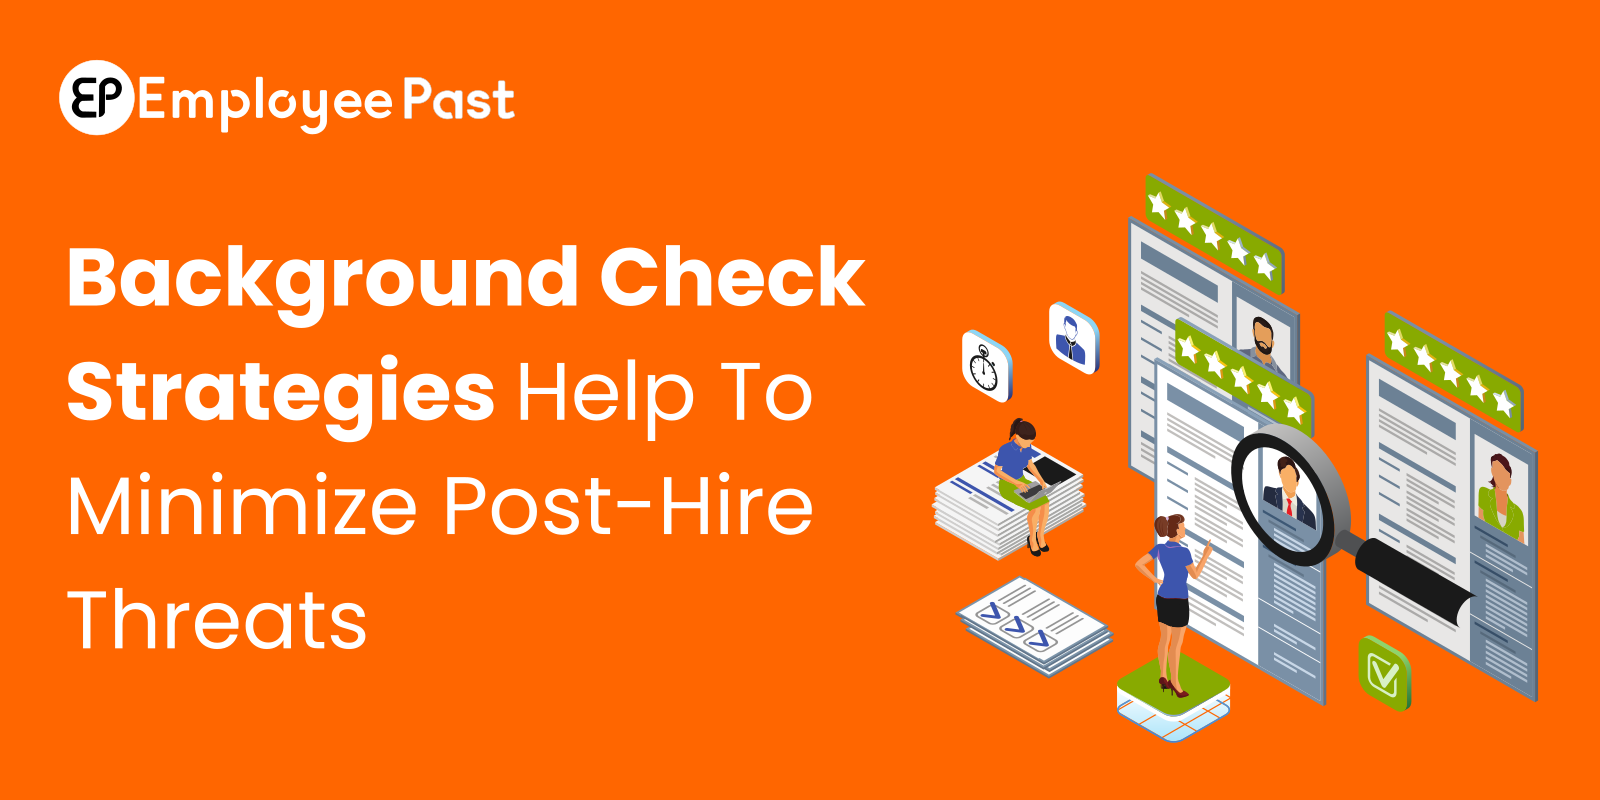 How Do Background Check Strategies Help To Minimize Post-Hire Threats?